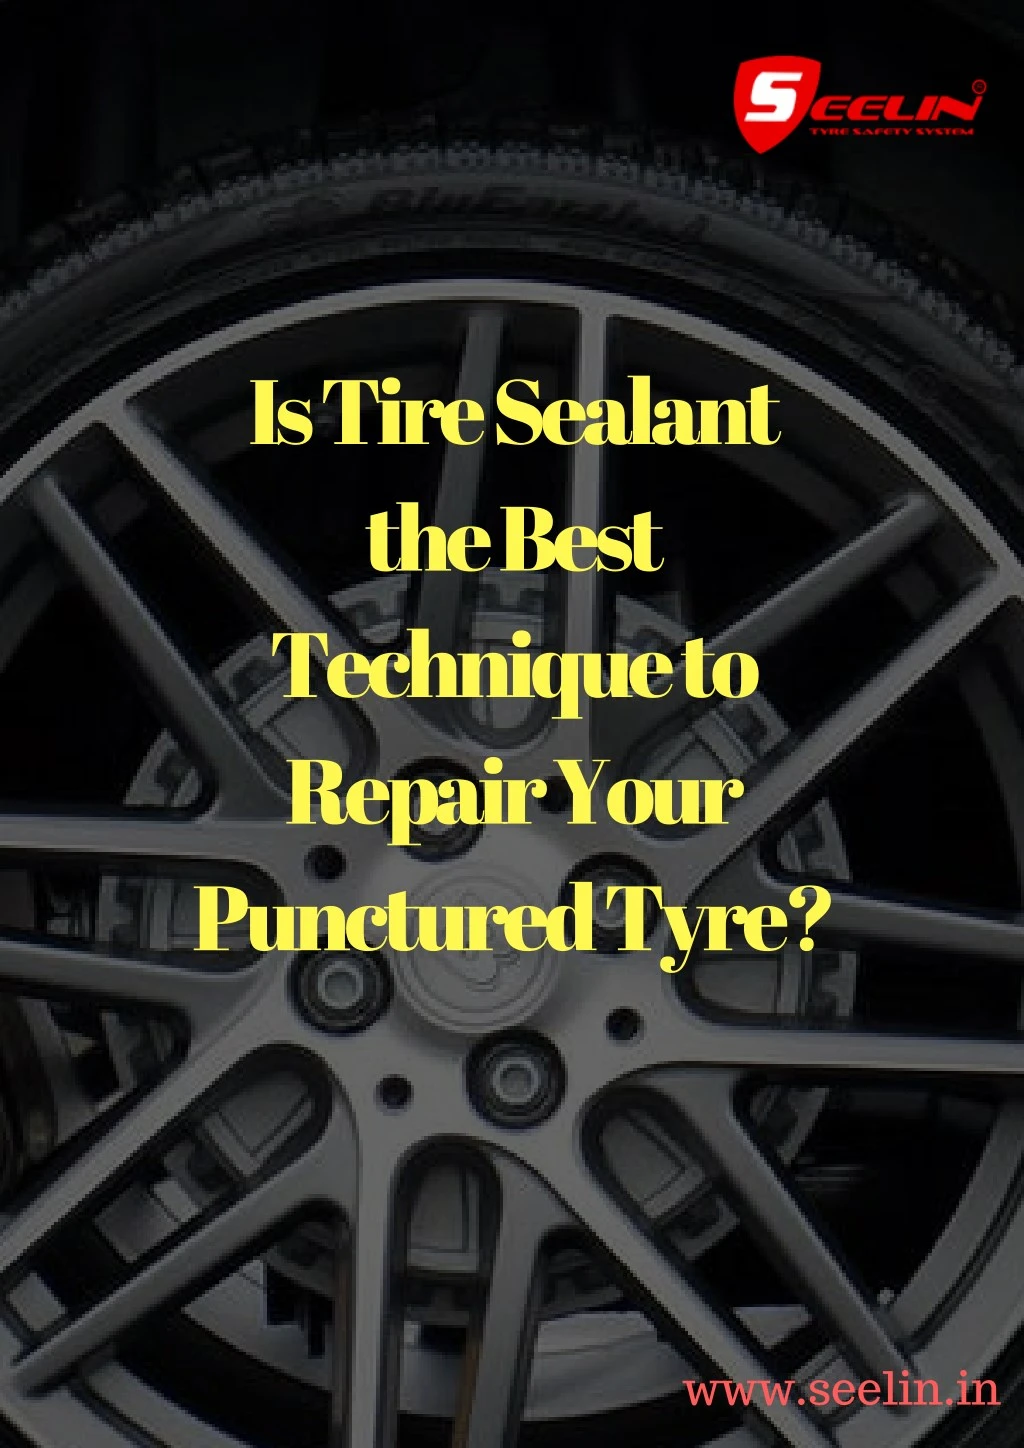 is tire sealant the best technique to repair your